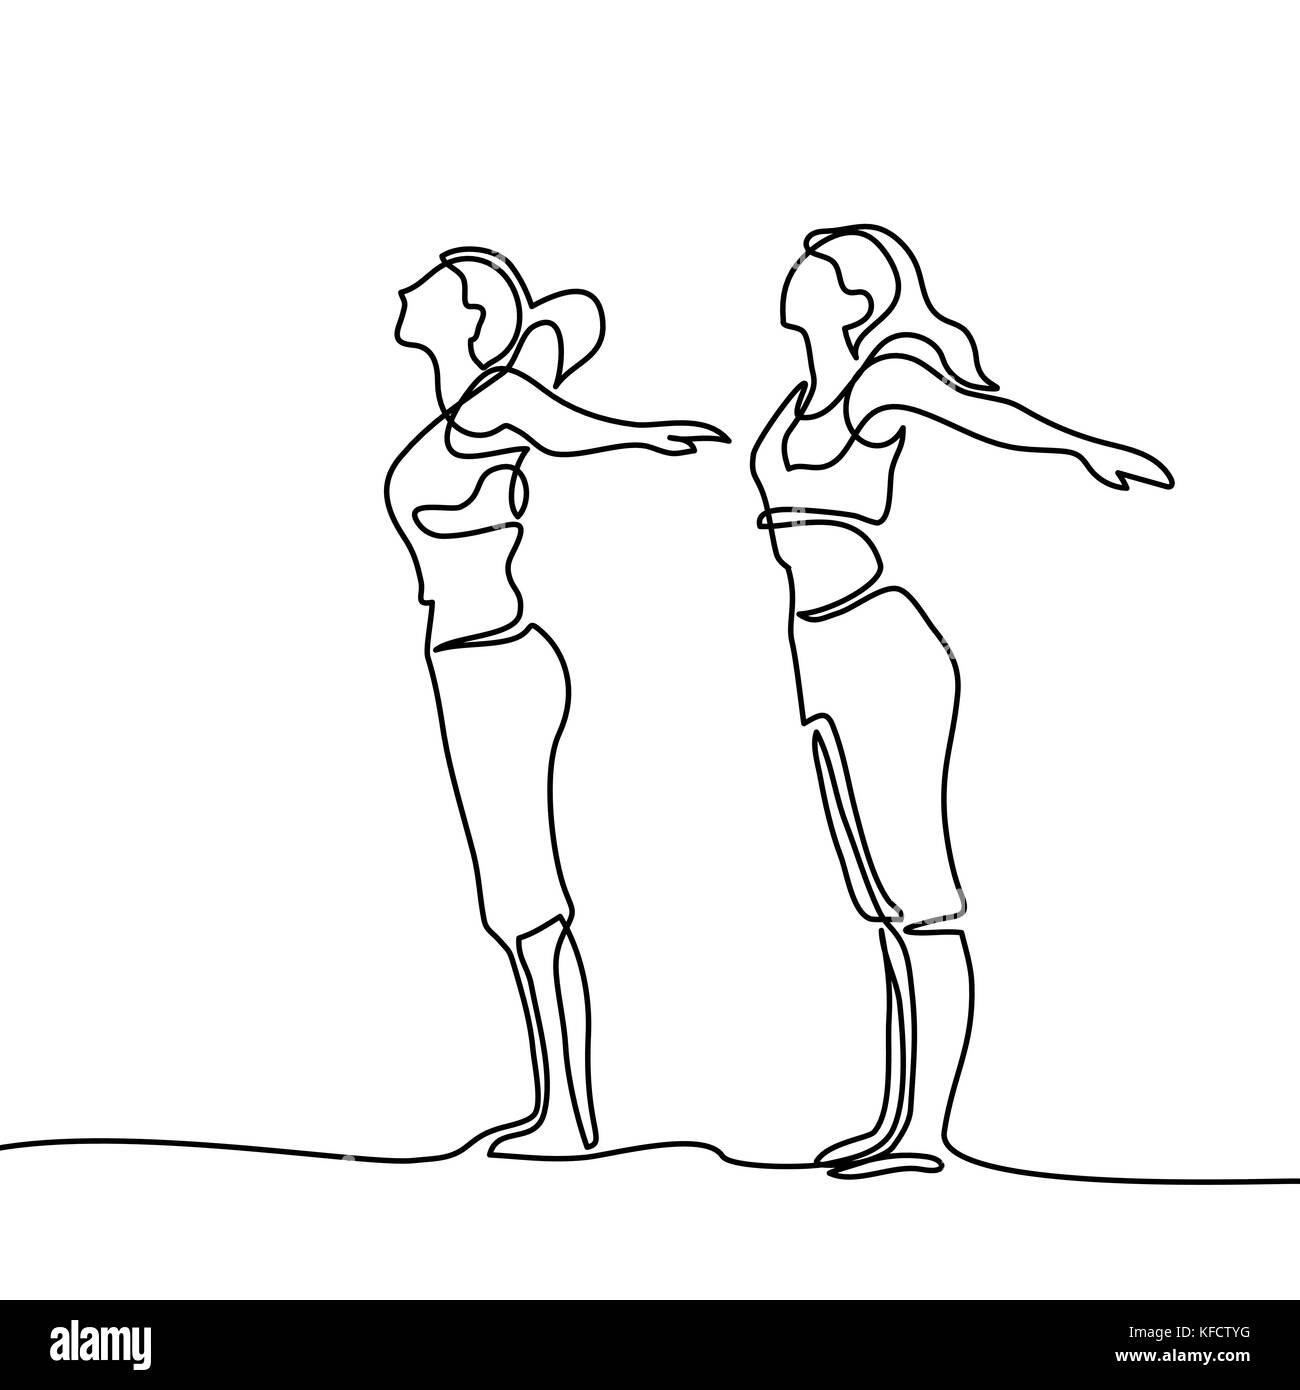 Continuous Line Drawing Two Women Doing Exercise In Yoga Pose Vector Illustration Stock Vector